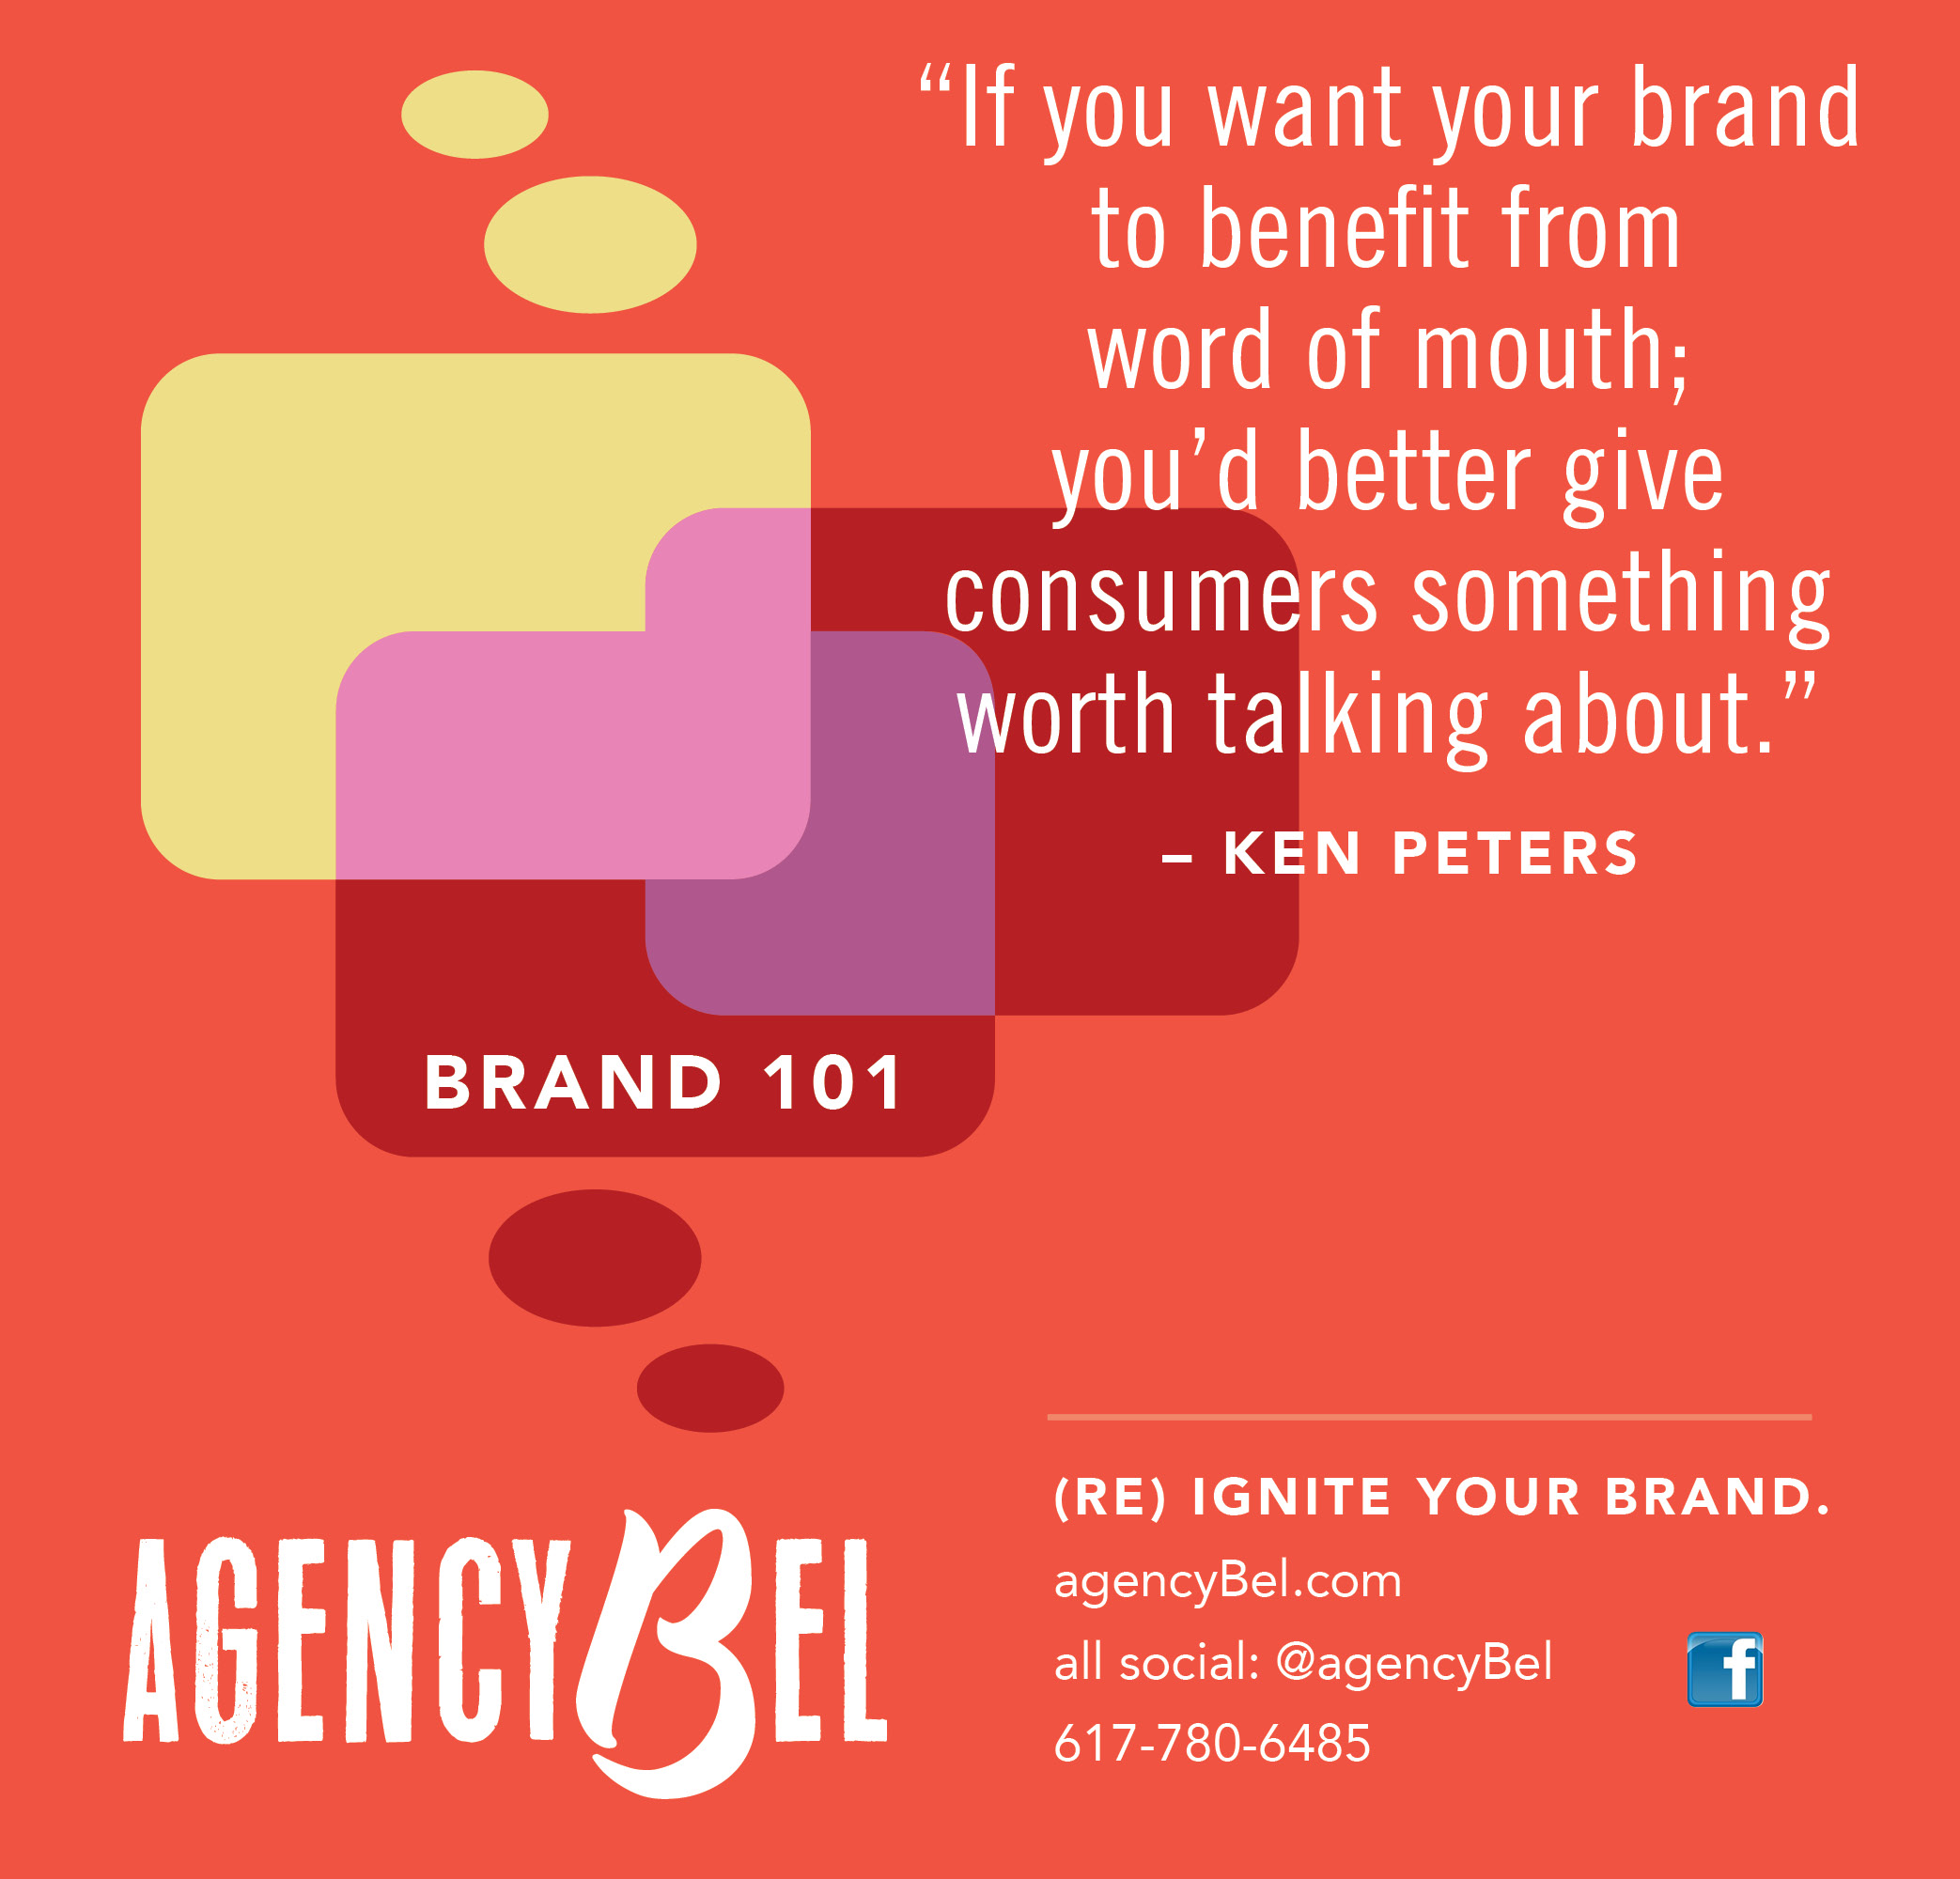 "If you want your brand to benefit from word of mouth you'd better give consumers something worth talking about." – Ken Peters